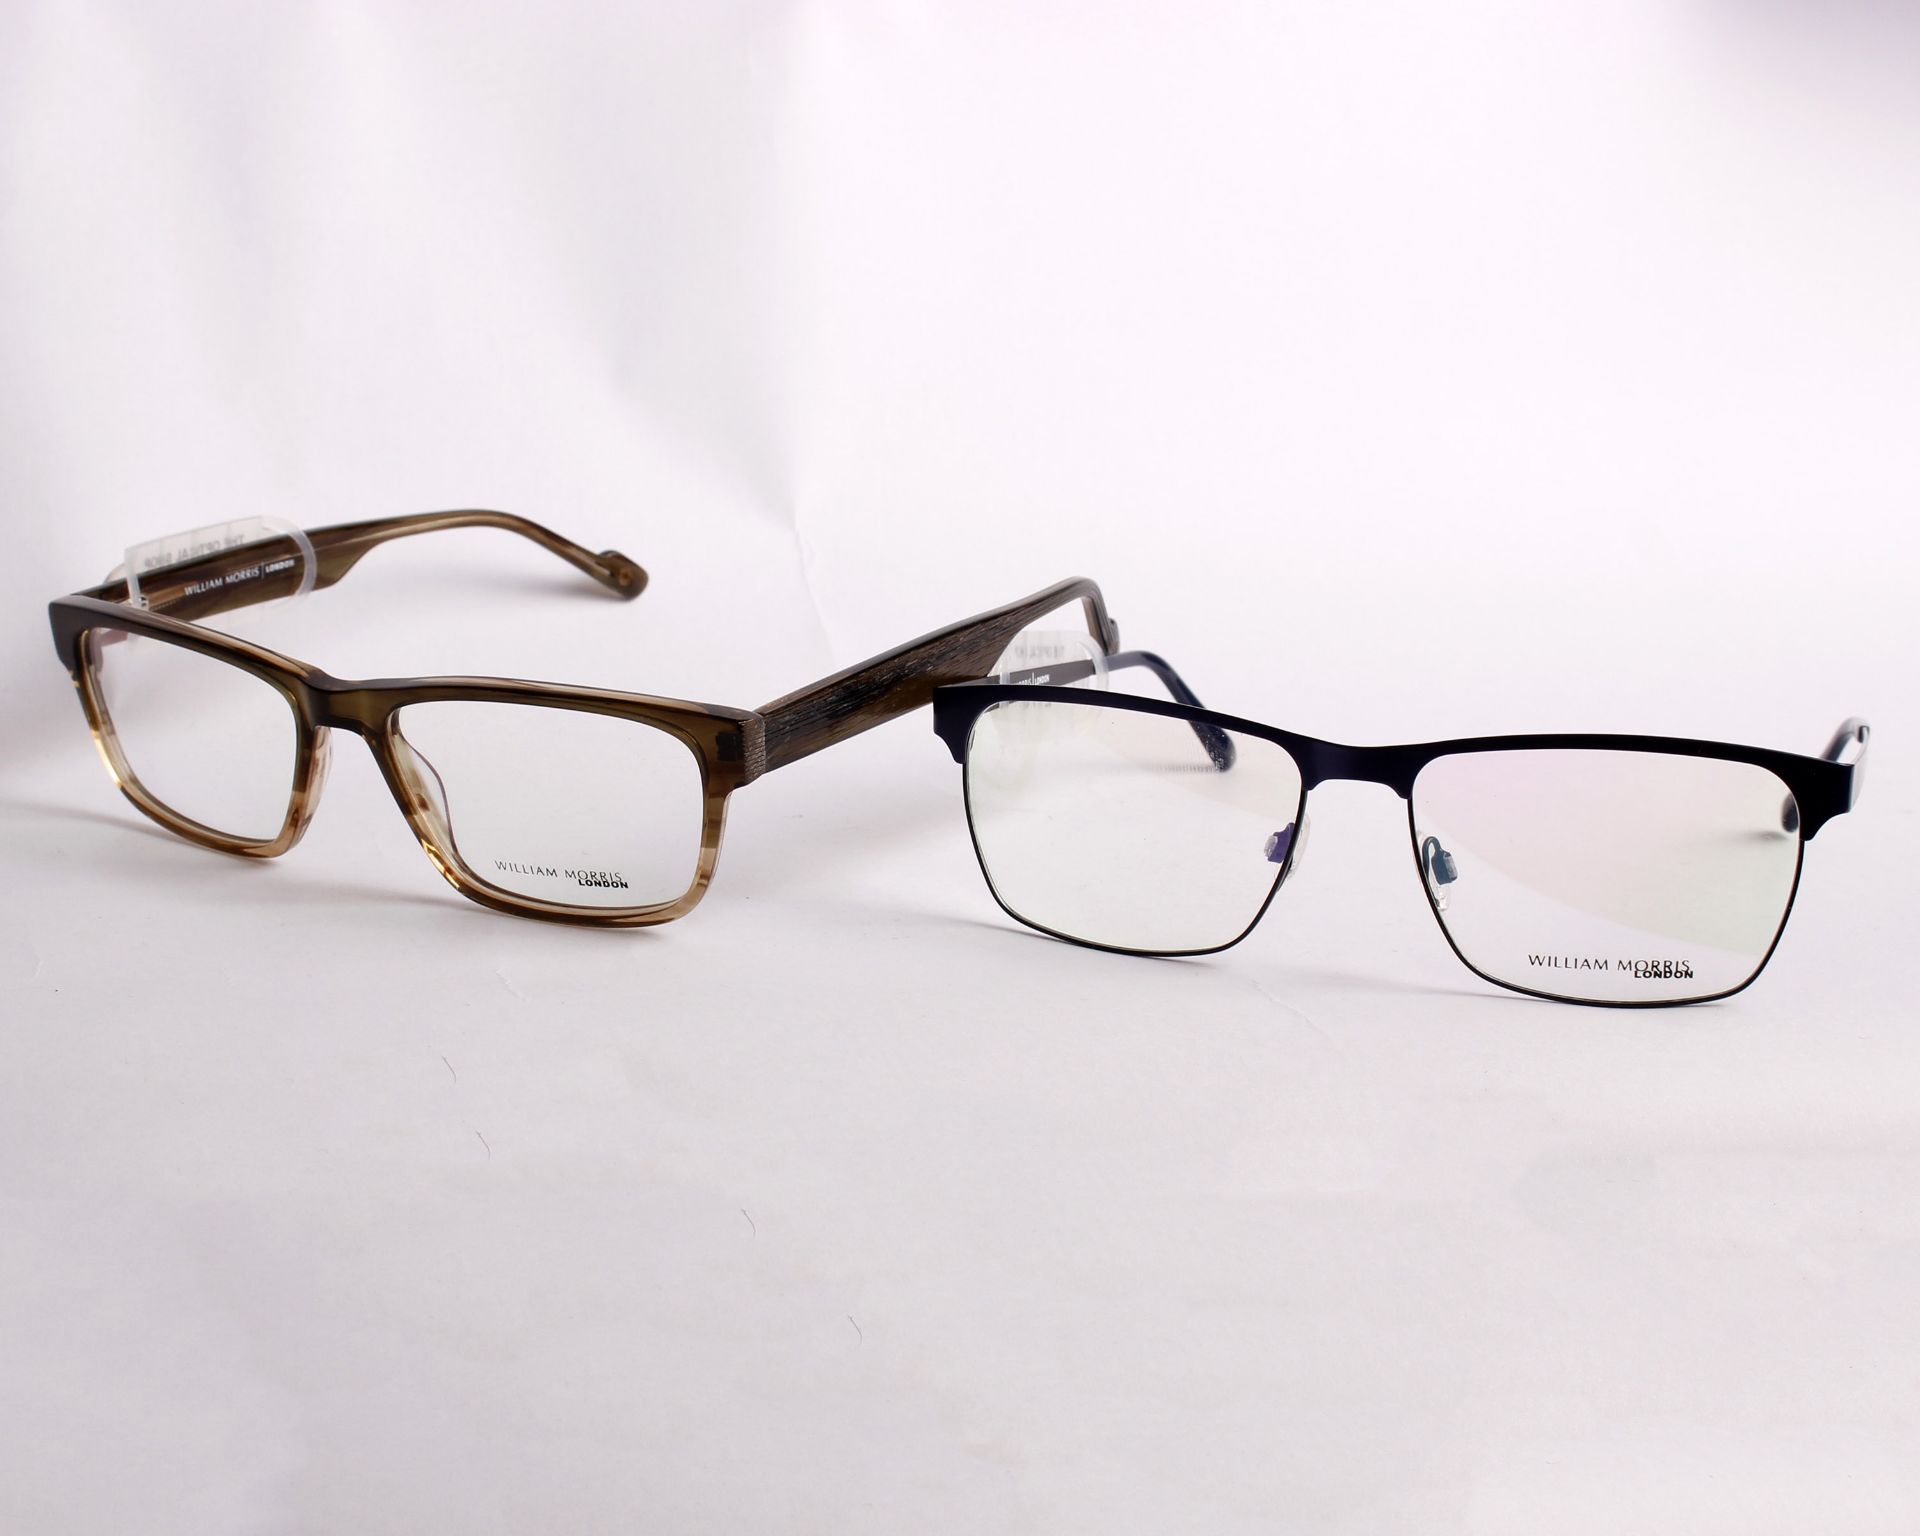 Two pairs of as new William Morris glasses frames with clear glass (RRP £170). - Image 2 of 3